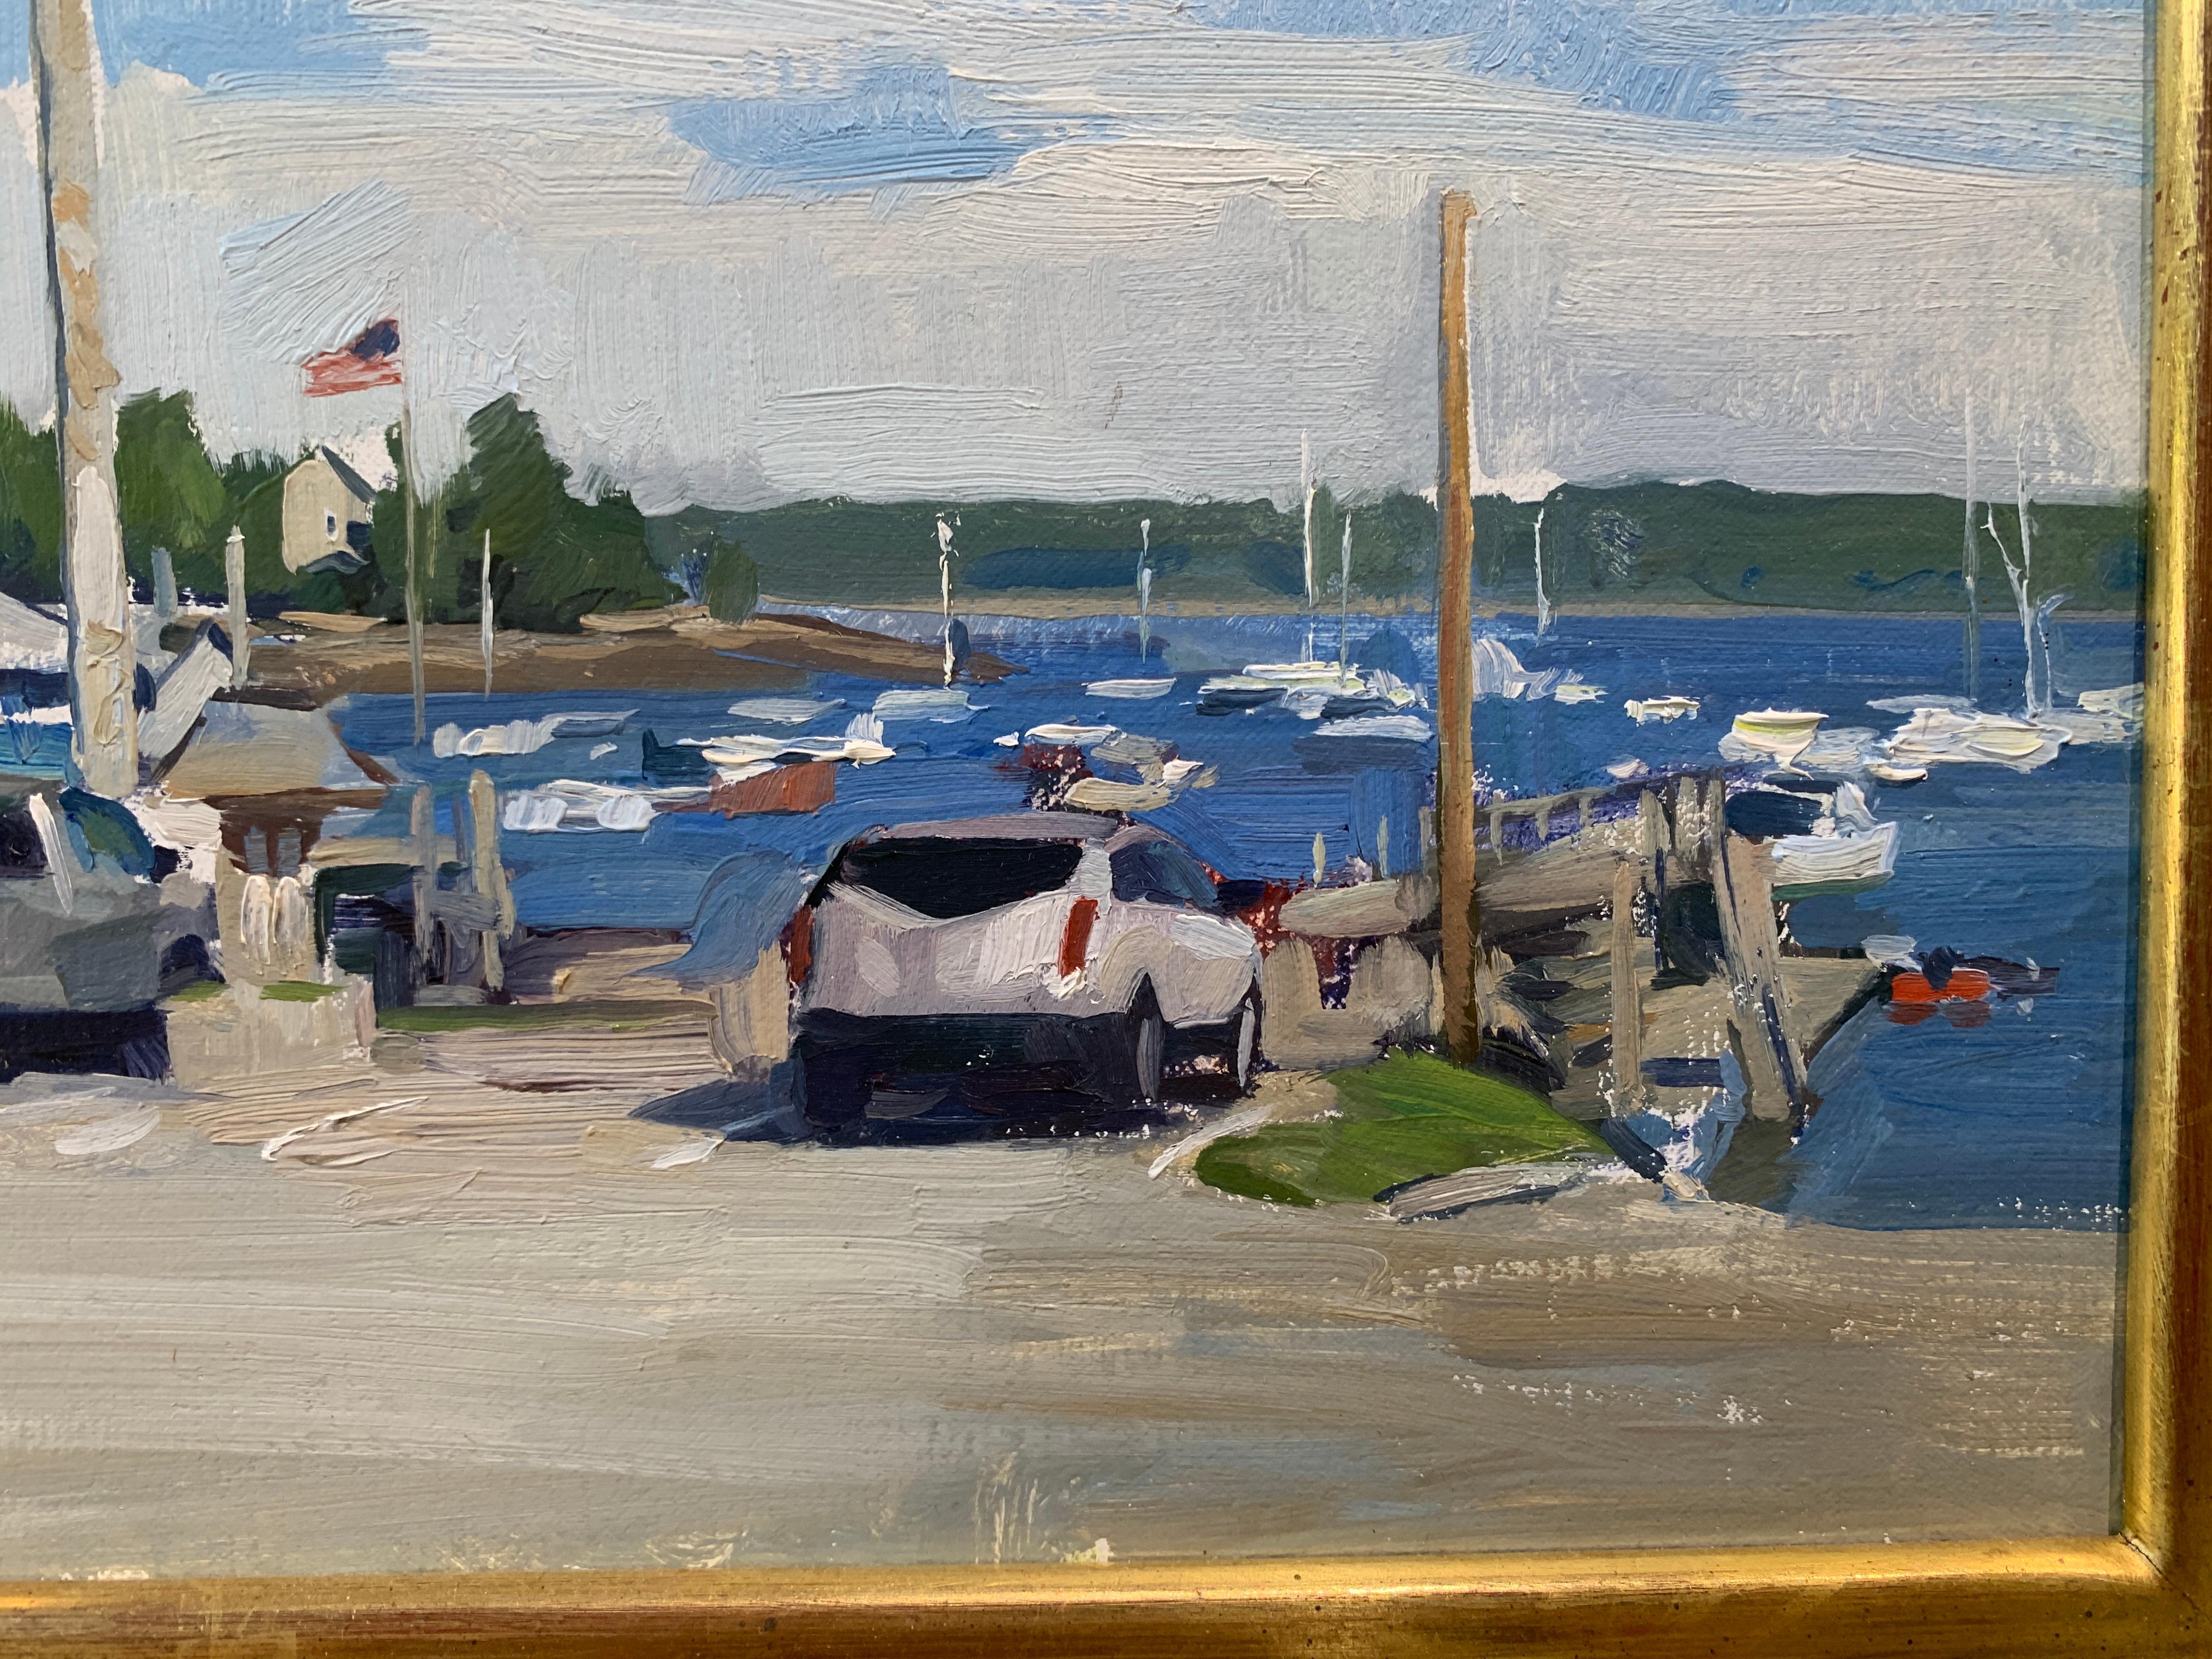 An oil painting, painted en plein air in the parking lot of the marina on Round Pond, Maine. Four cars are depicted parked along the entrance to the marina. An American flag can be seen flapping in the breeze. Boats sail in the pond in the distance.